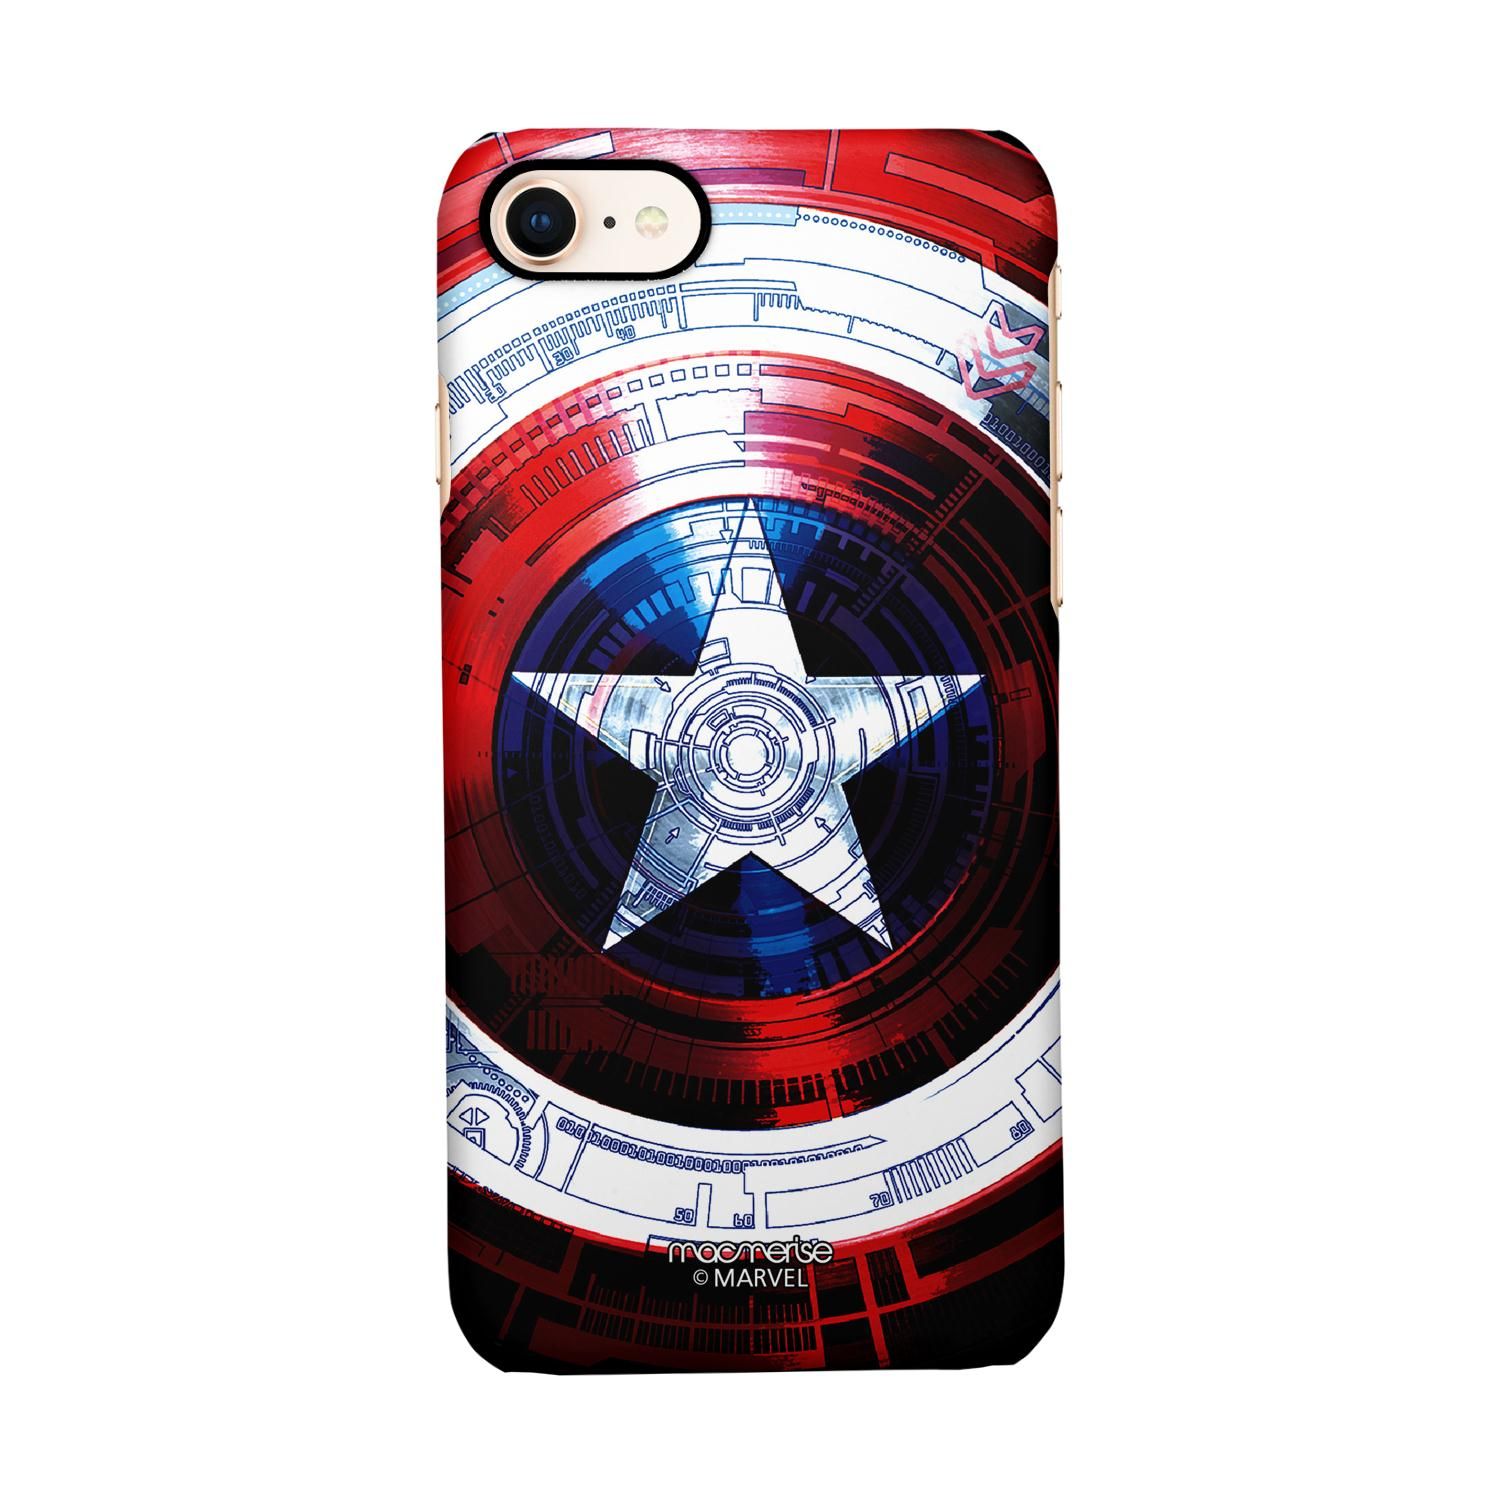 Buy Captains Shield Decoded - Sleek Phone Case for iPhone 7 Online